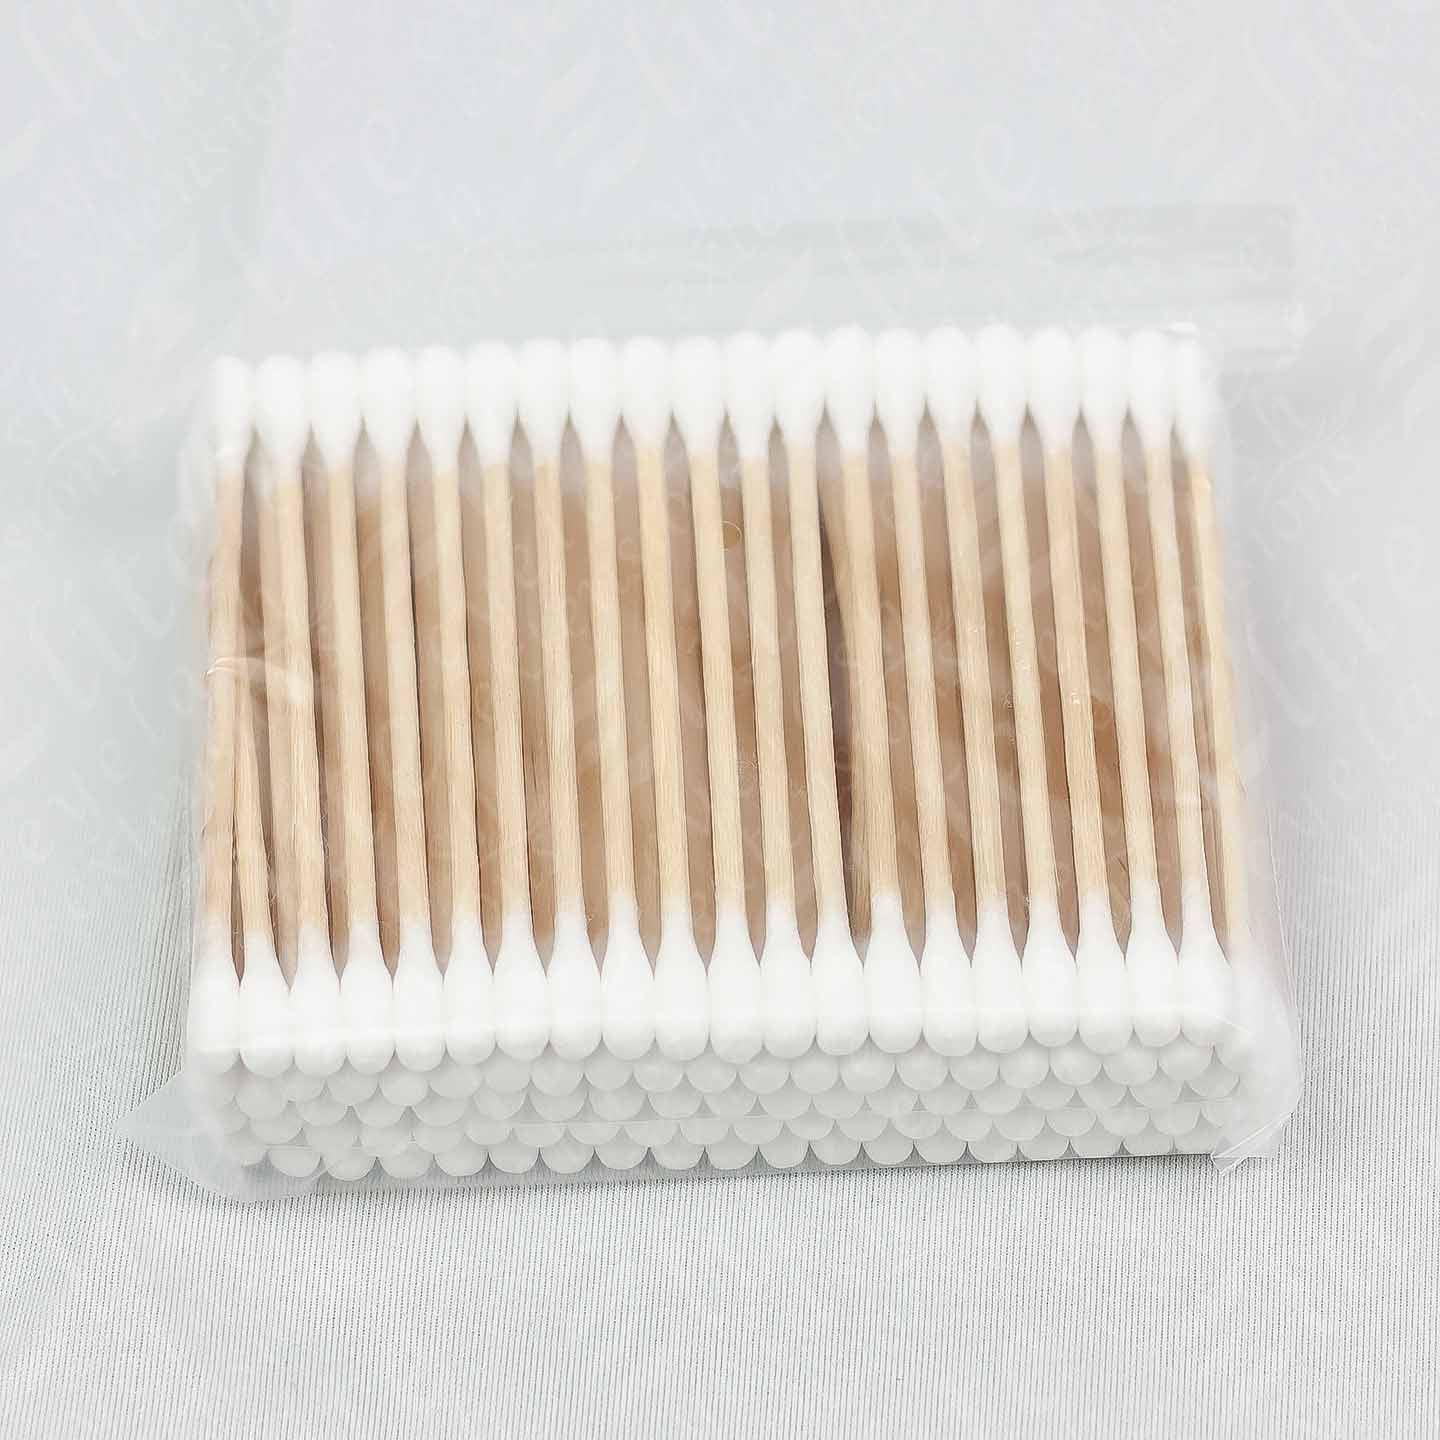 Elite Extra Long Wood Stick Cotton Swabs, 200-Count